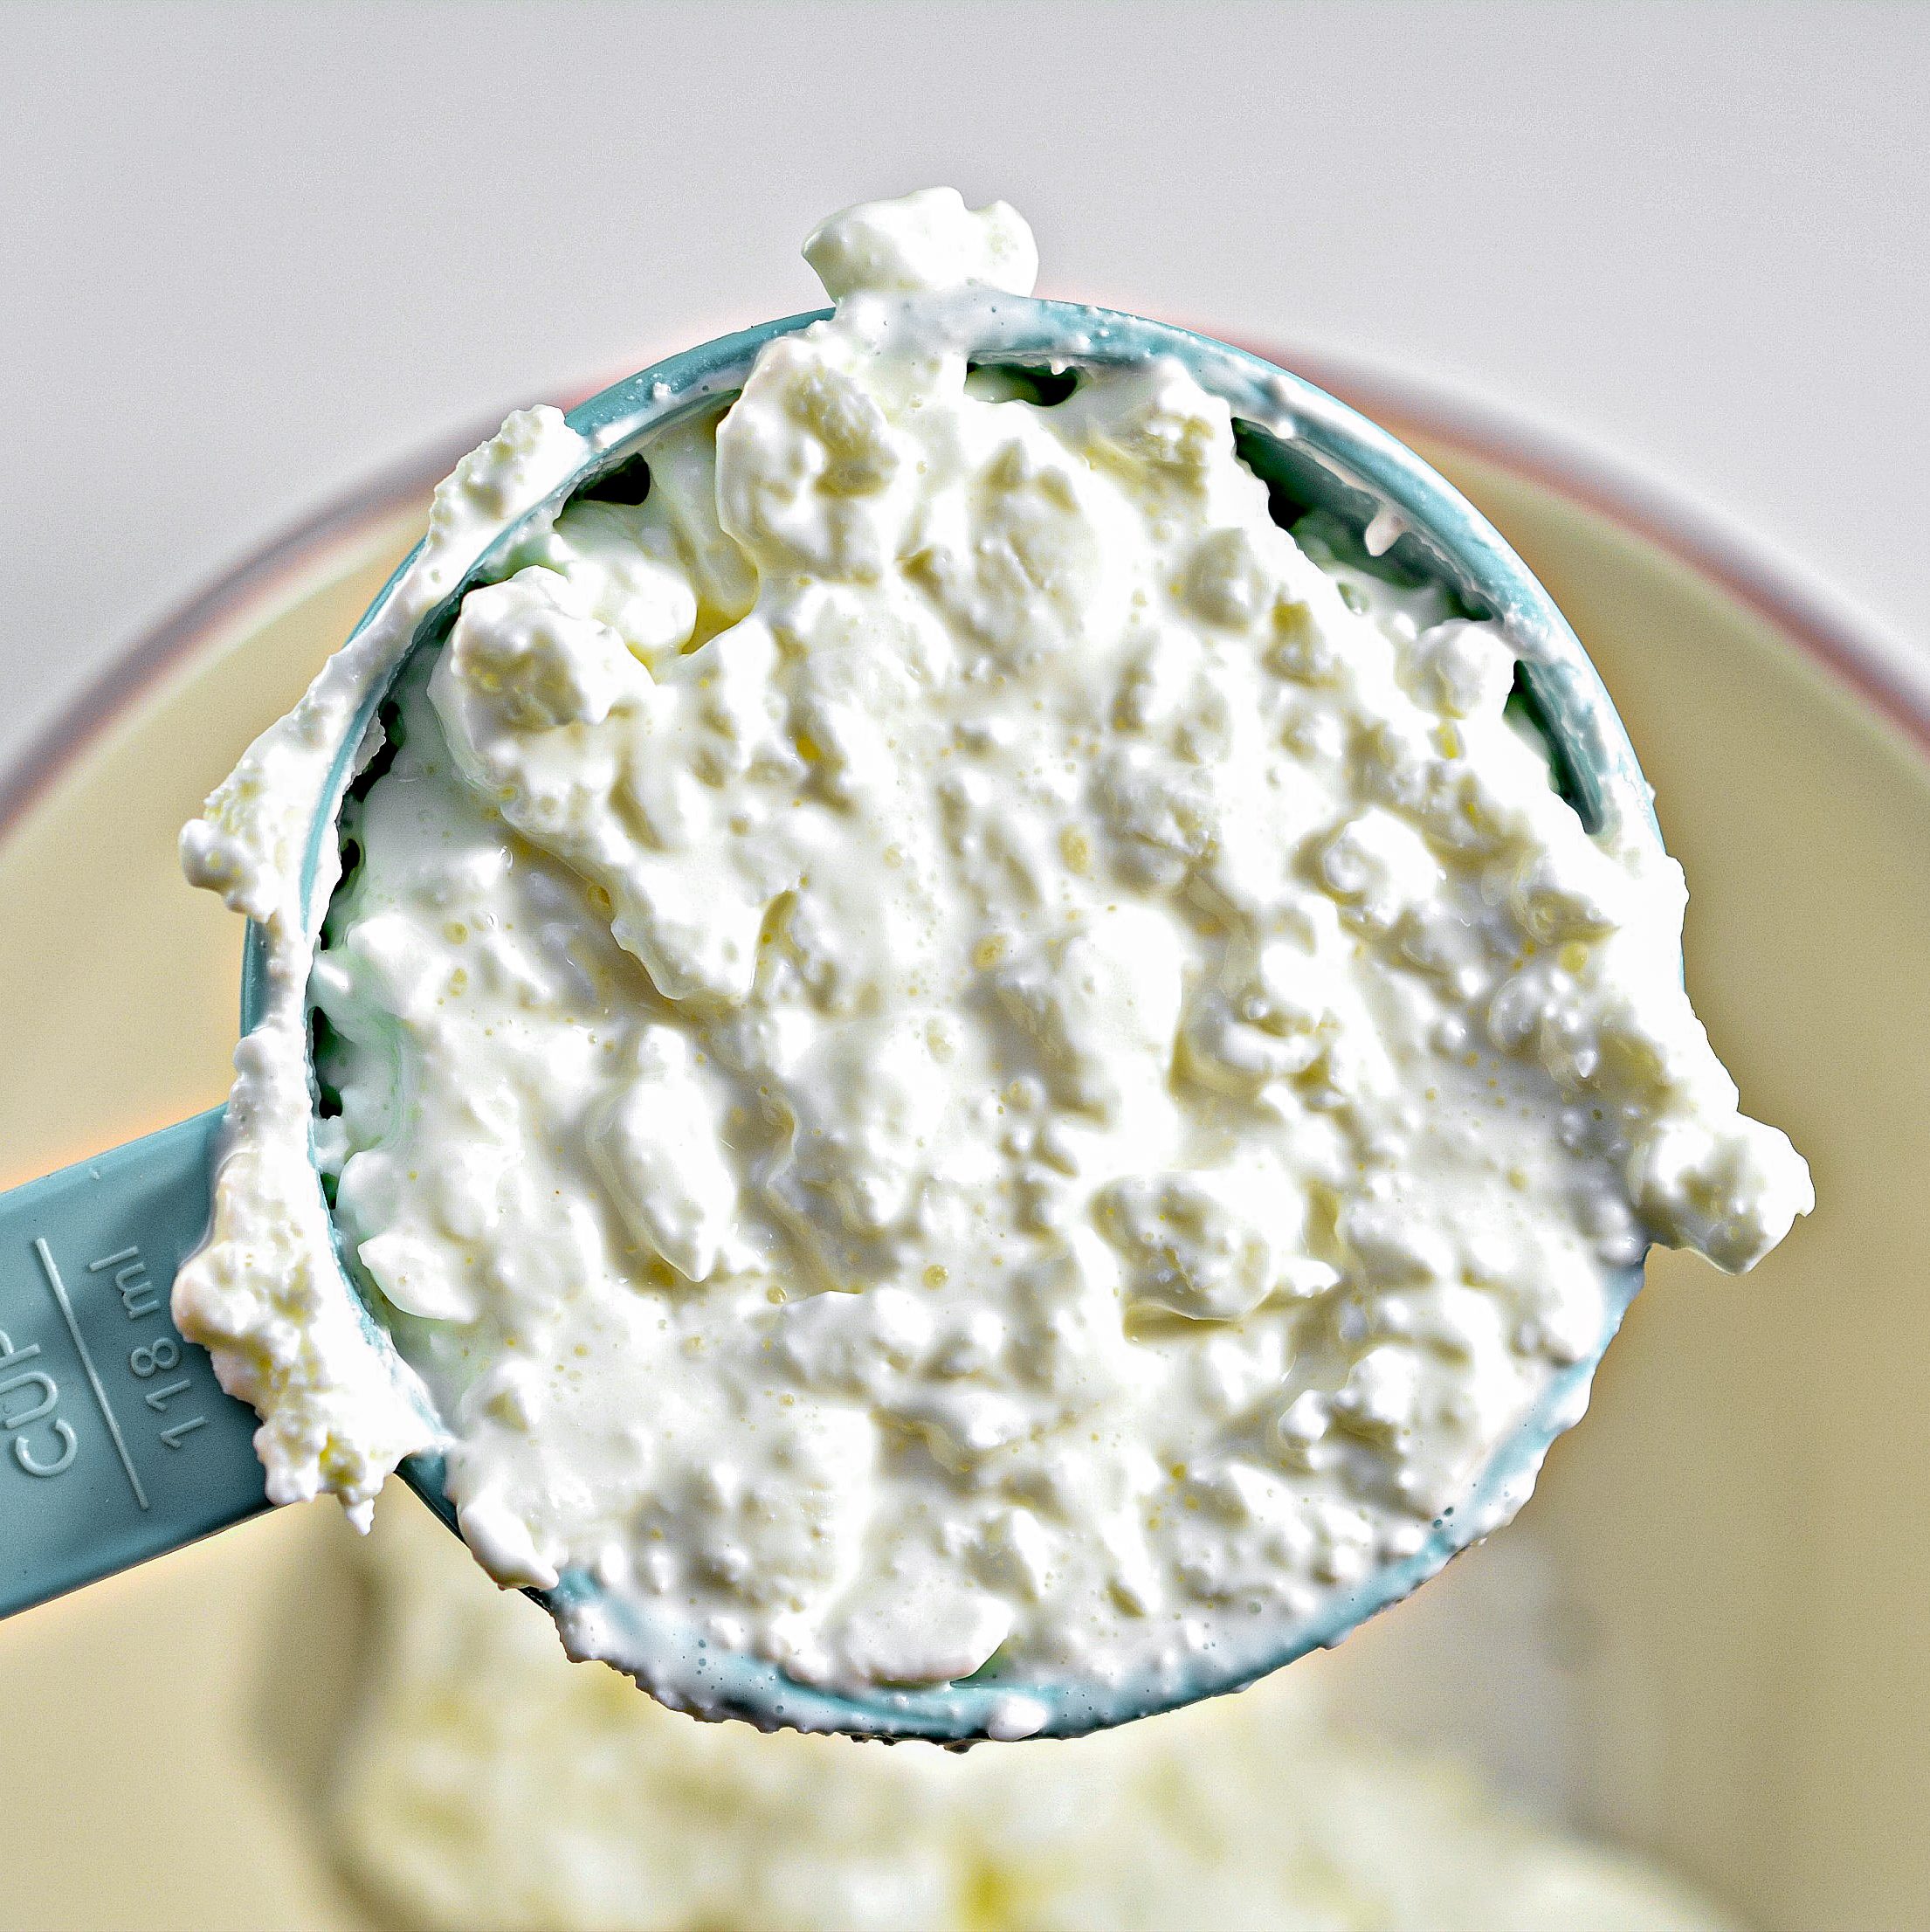 add ½ cup of ricotta cheese.